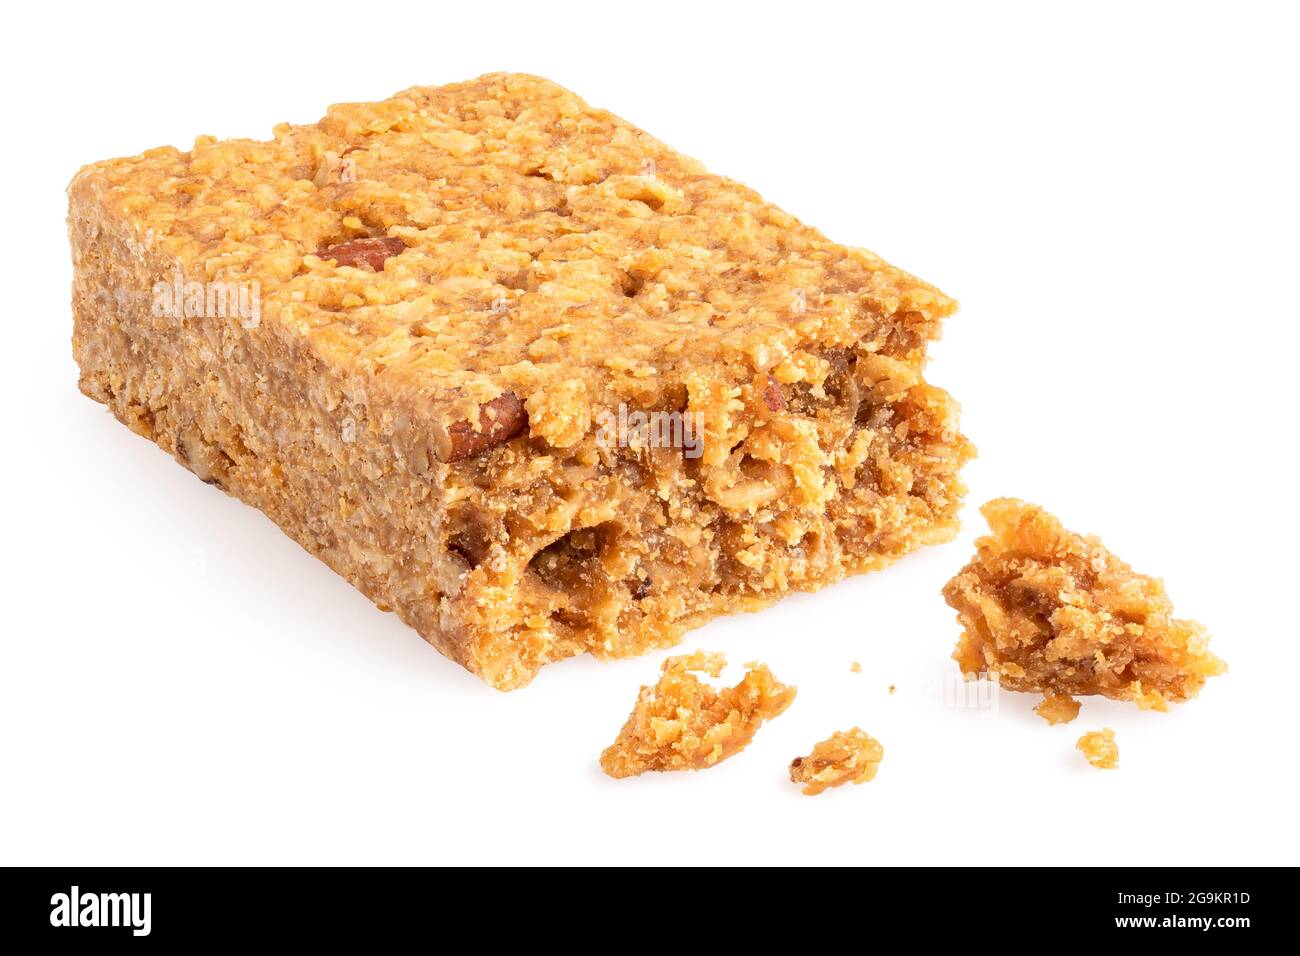 Partially eaten oat flapjack with nuts isolated on white. With crumbs. Stock Photo